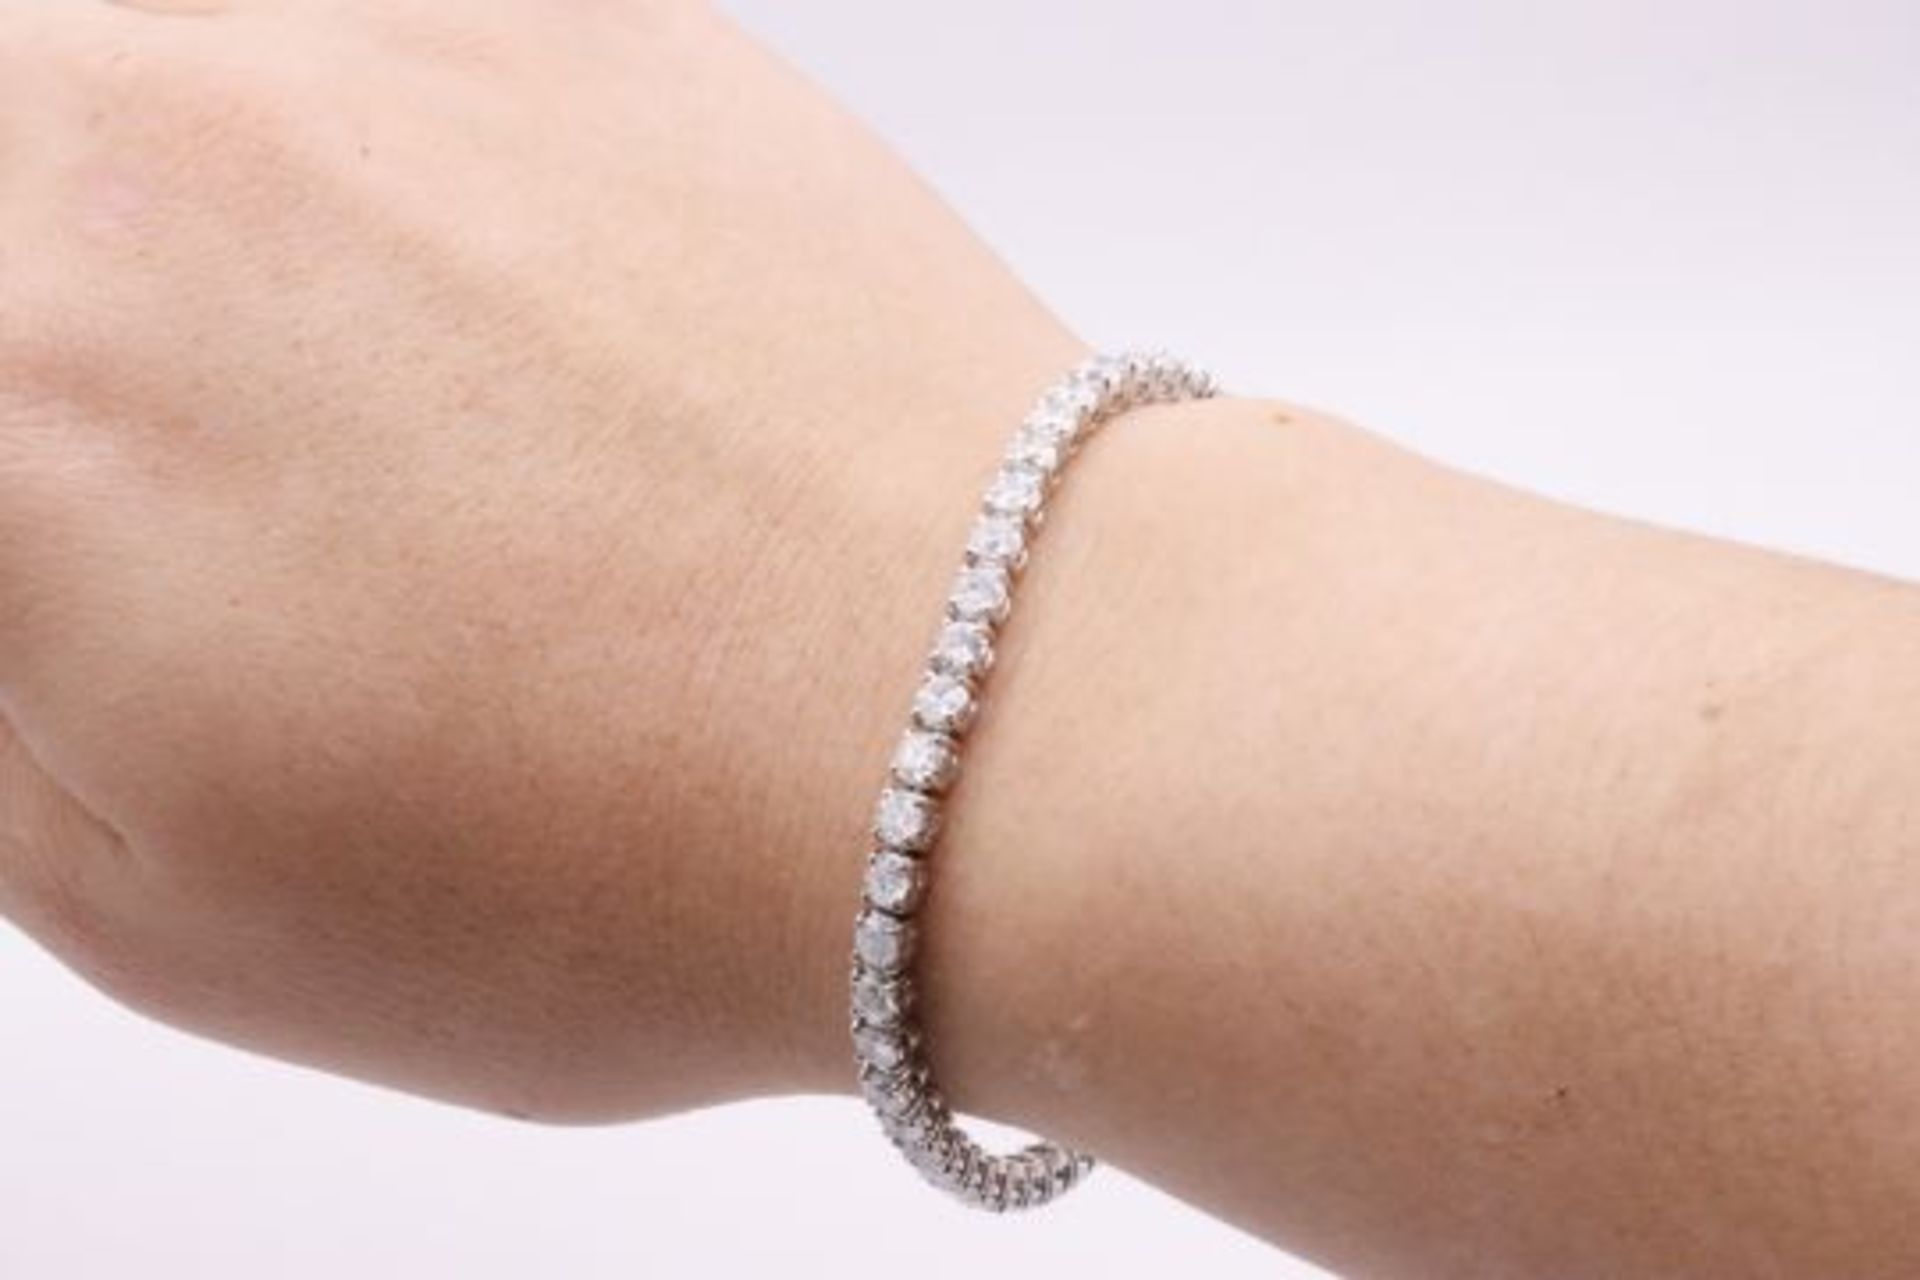 **ON SALE** 'Brand New' 9.0 Carat 18ct White Gold Tennis Bracelet set with Round Brilliant Cut - Image 6 of 7